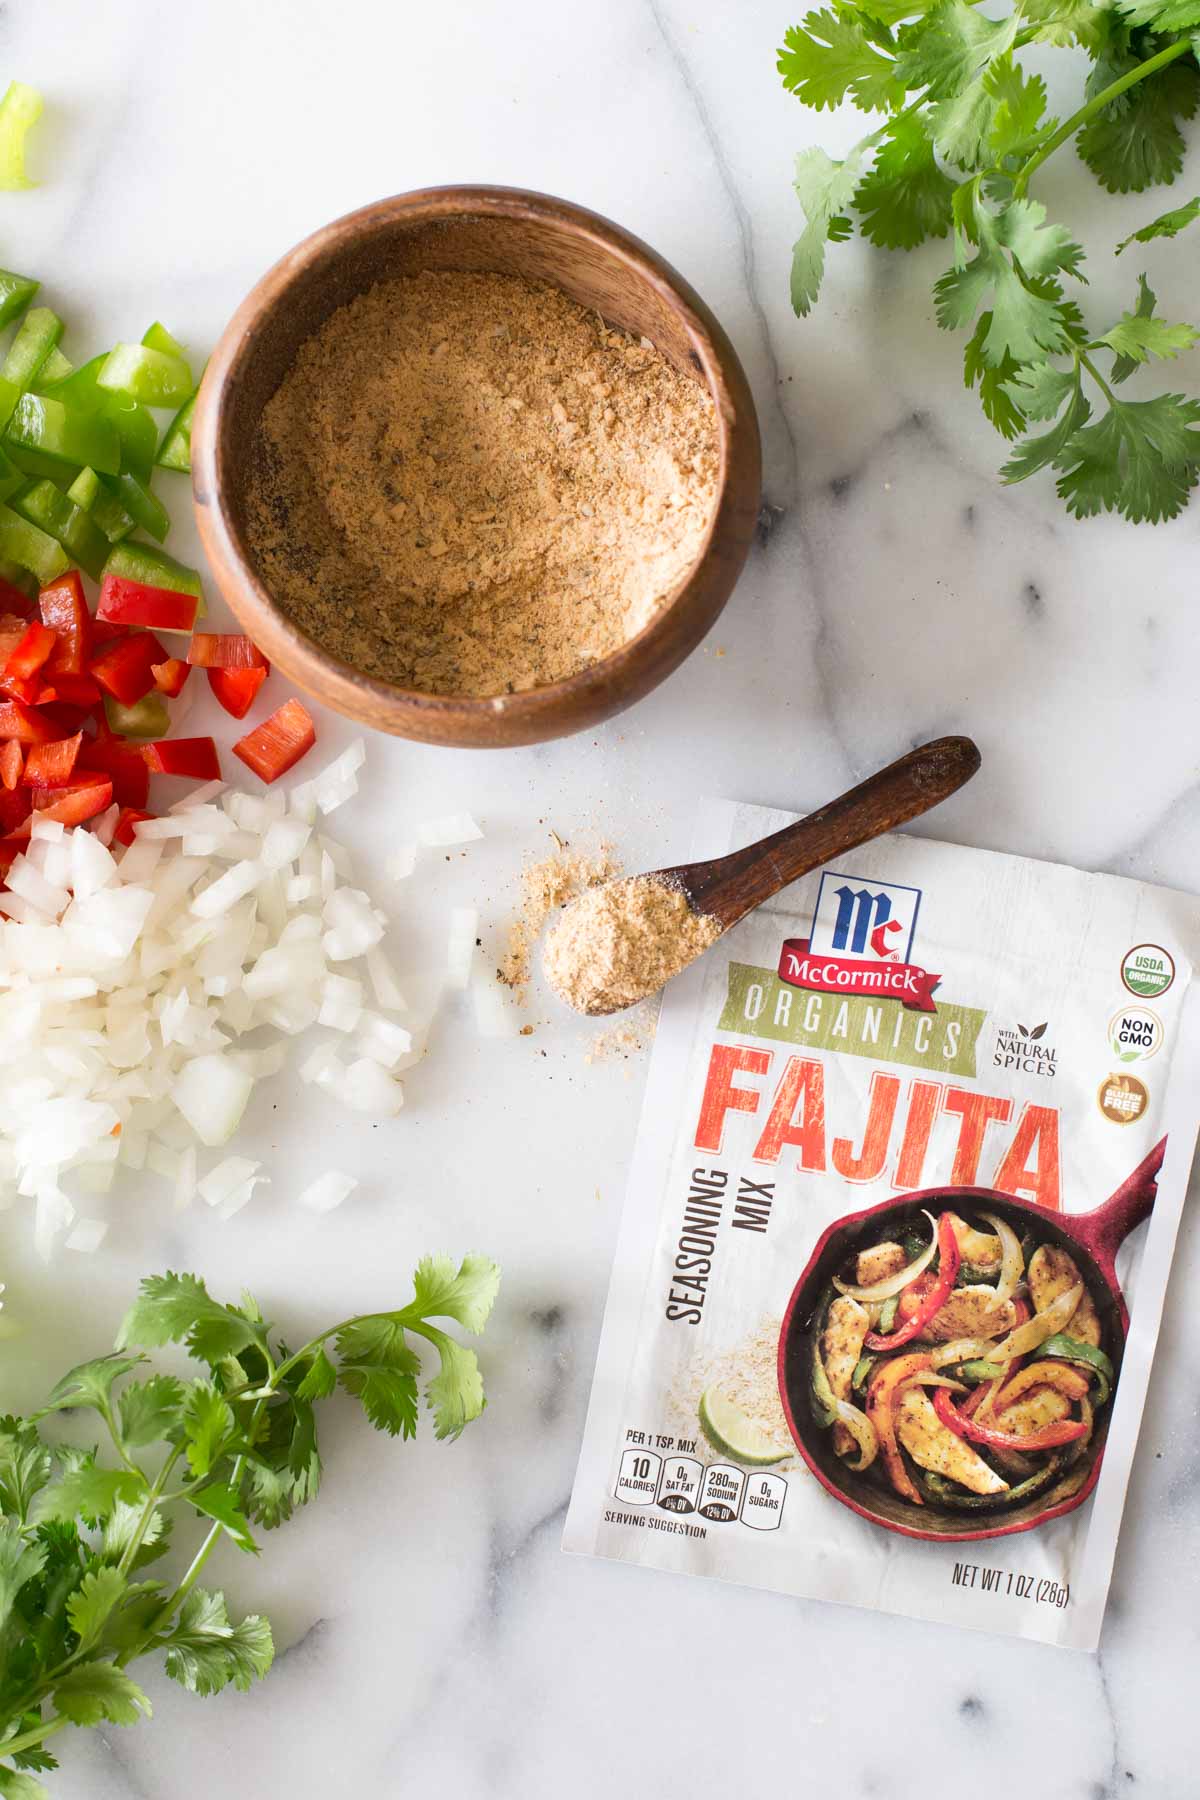 A packet of McCormick Organics Fajita Seasoning Mix, with a small wood spoon of the seasoning mix next to a small wood bowl of the seasoning mix, along with copped green and red peppers, chopped onions and fresh cilantro. 